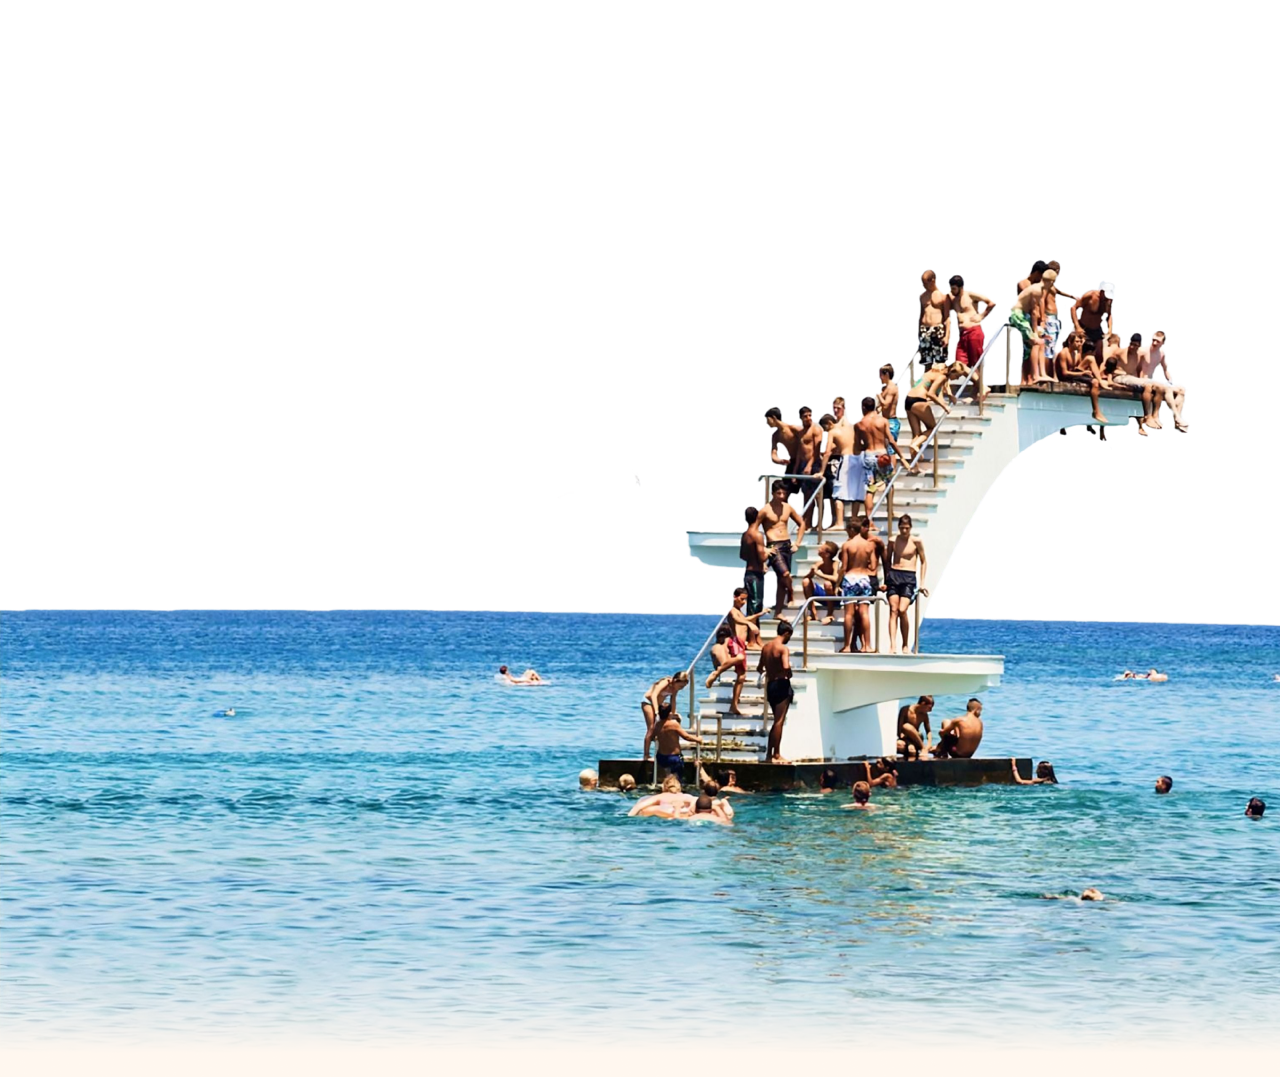 kids jumping off diving board into ocean